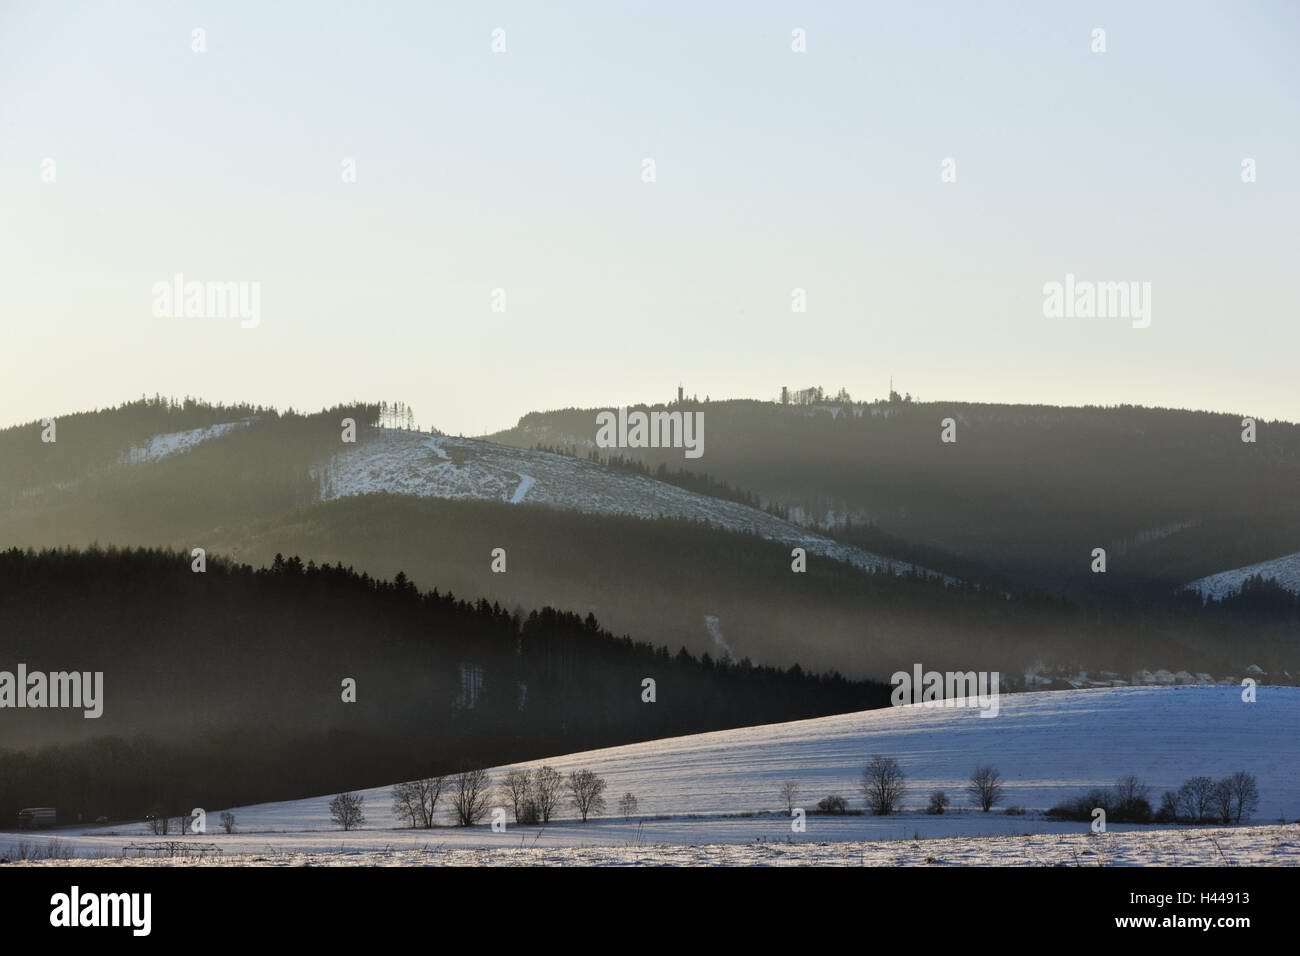 Germany, Thuringia, Thuringian wood, Kickelhahn, evening light, winter, place of interest, destination, tourism, scenery, hill, mountain, foggy, fields, woods, snow-covered, snow, season, heaven, cloudless, sunny, Stock Photo